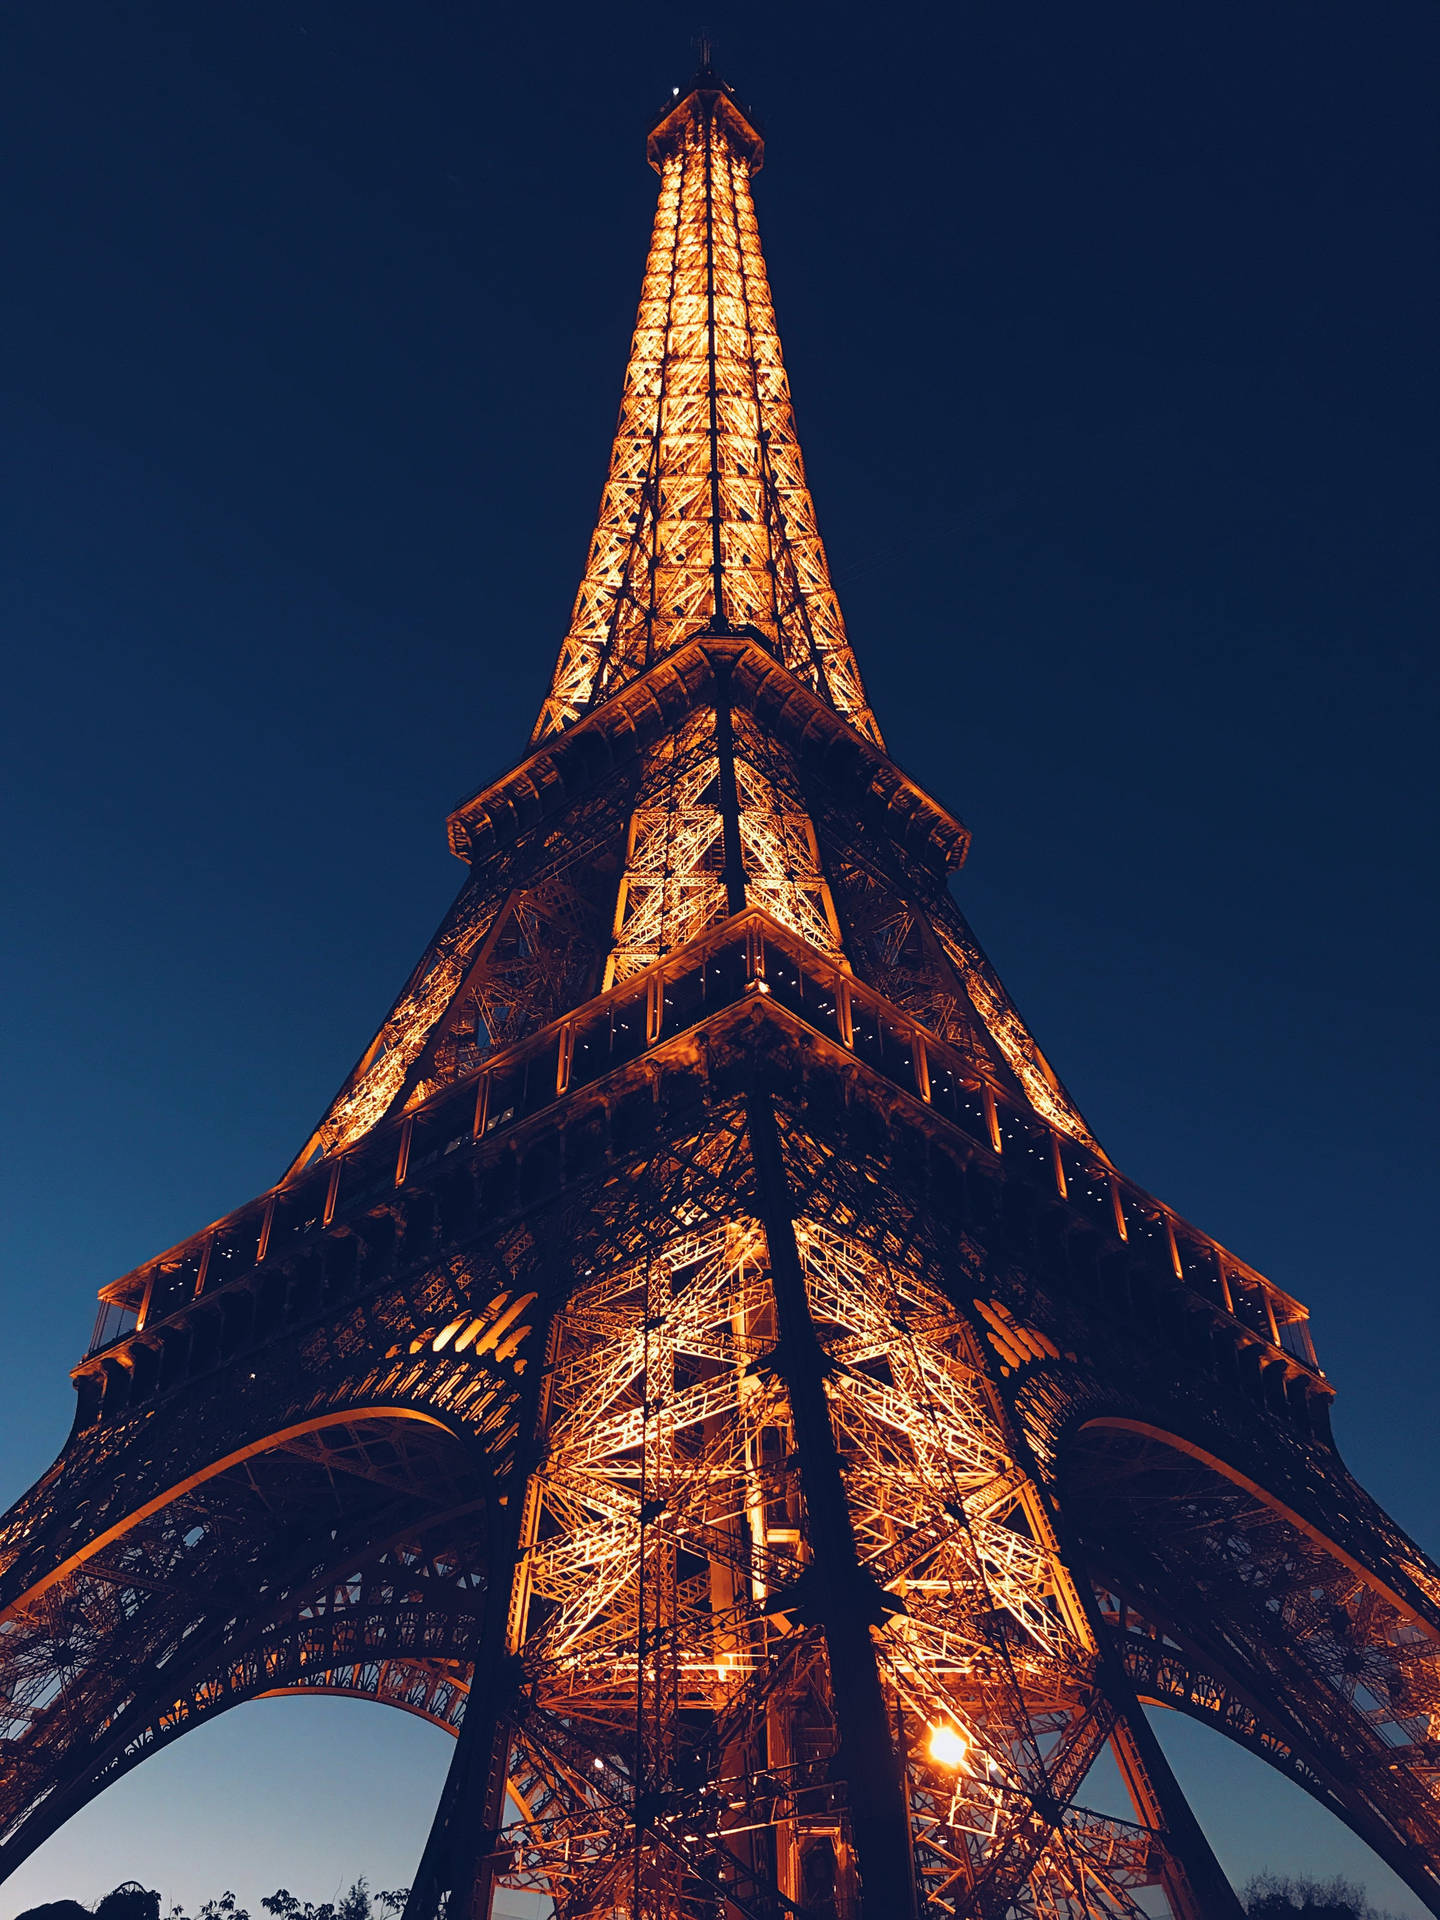 The Eiffel Tower Glittering In The Night Background